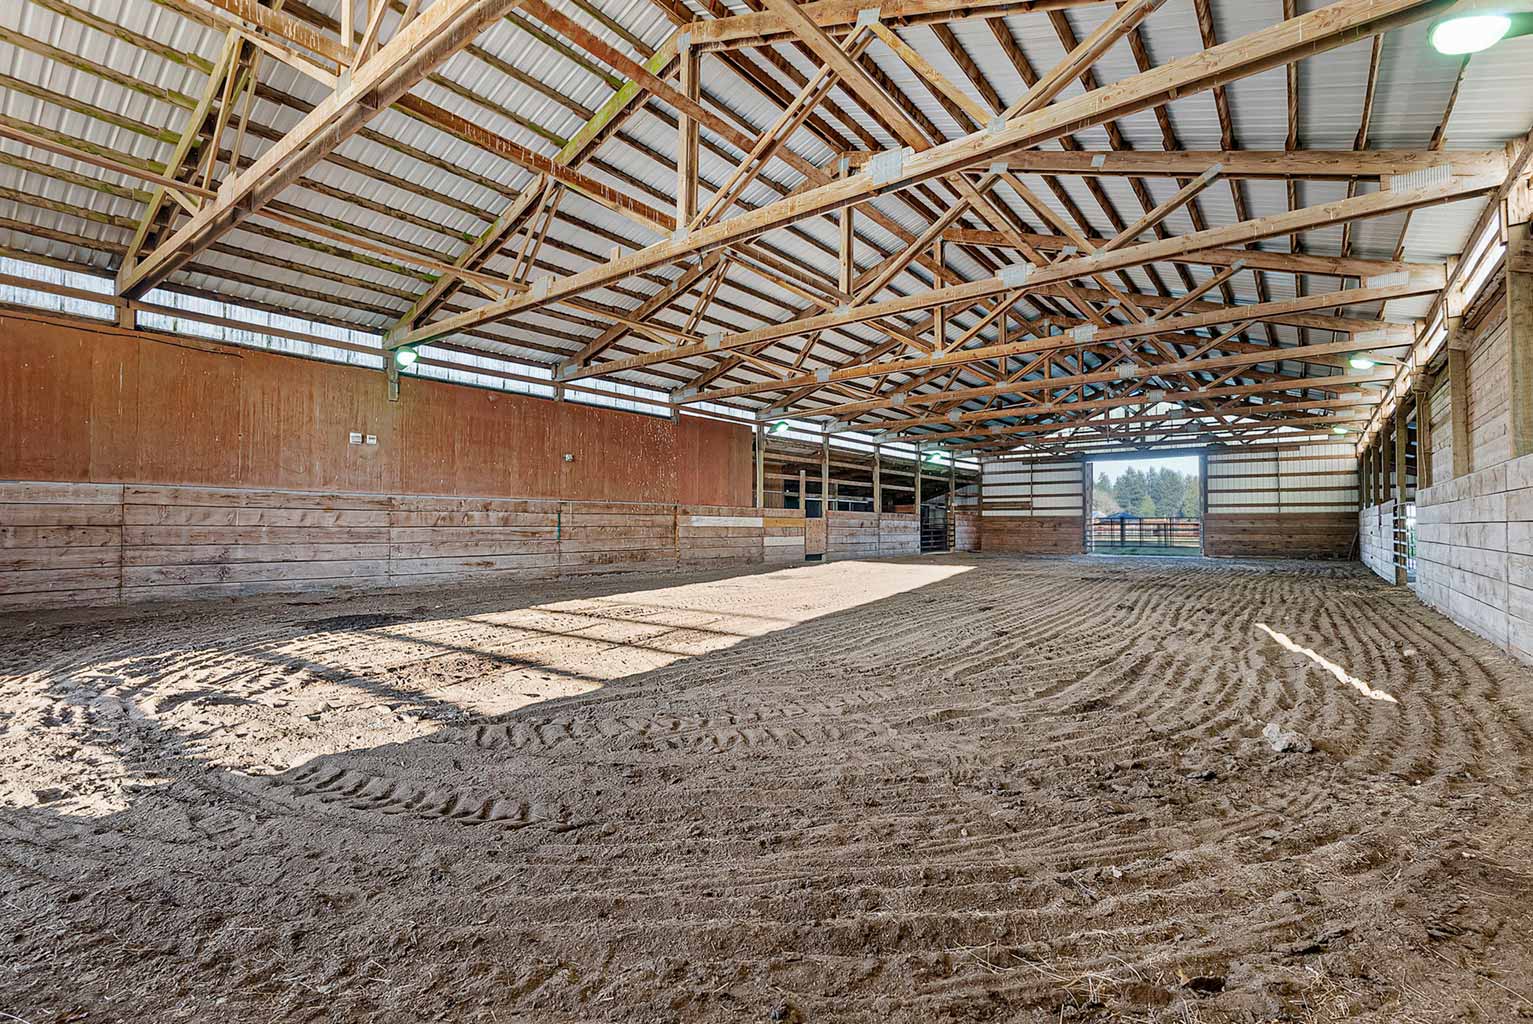 The main barn features a 72' x 120' indoor arena